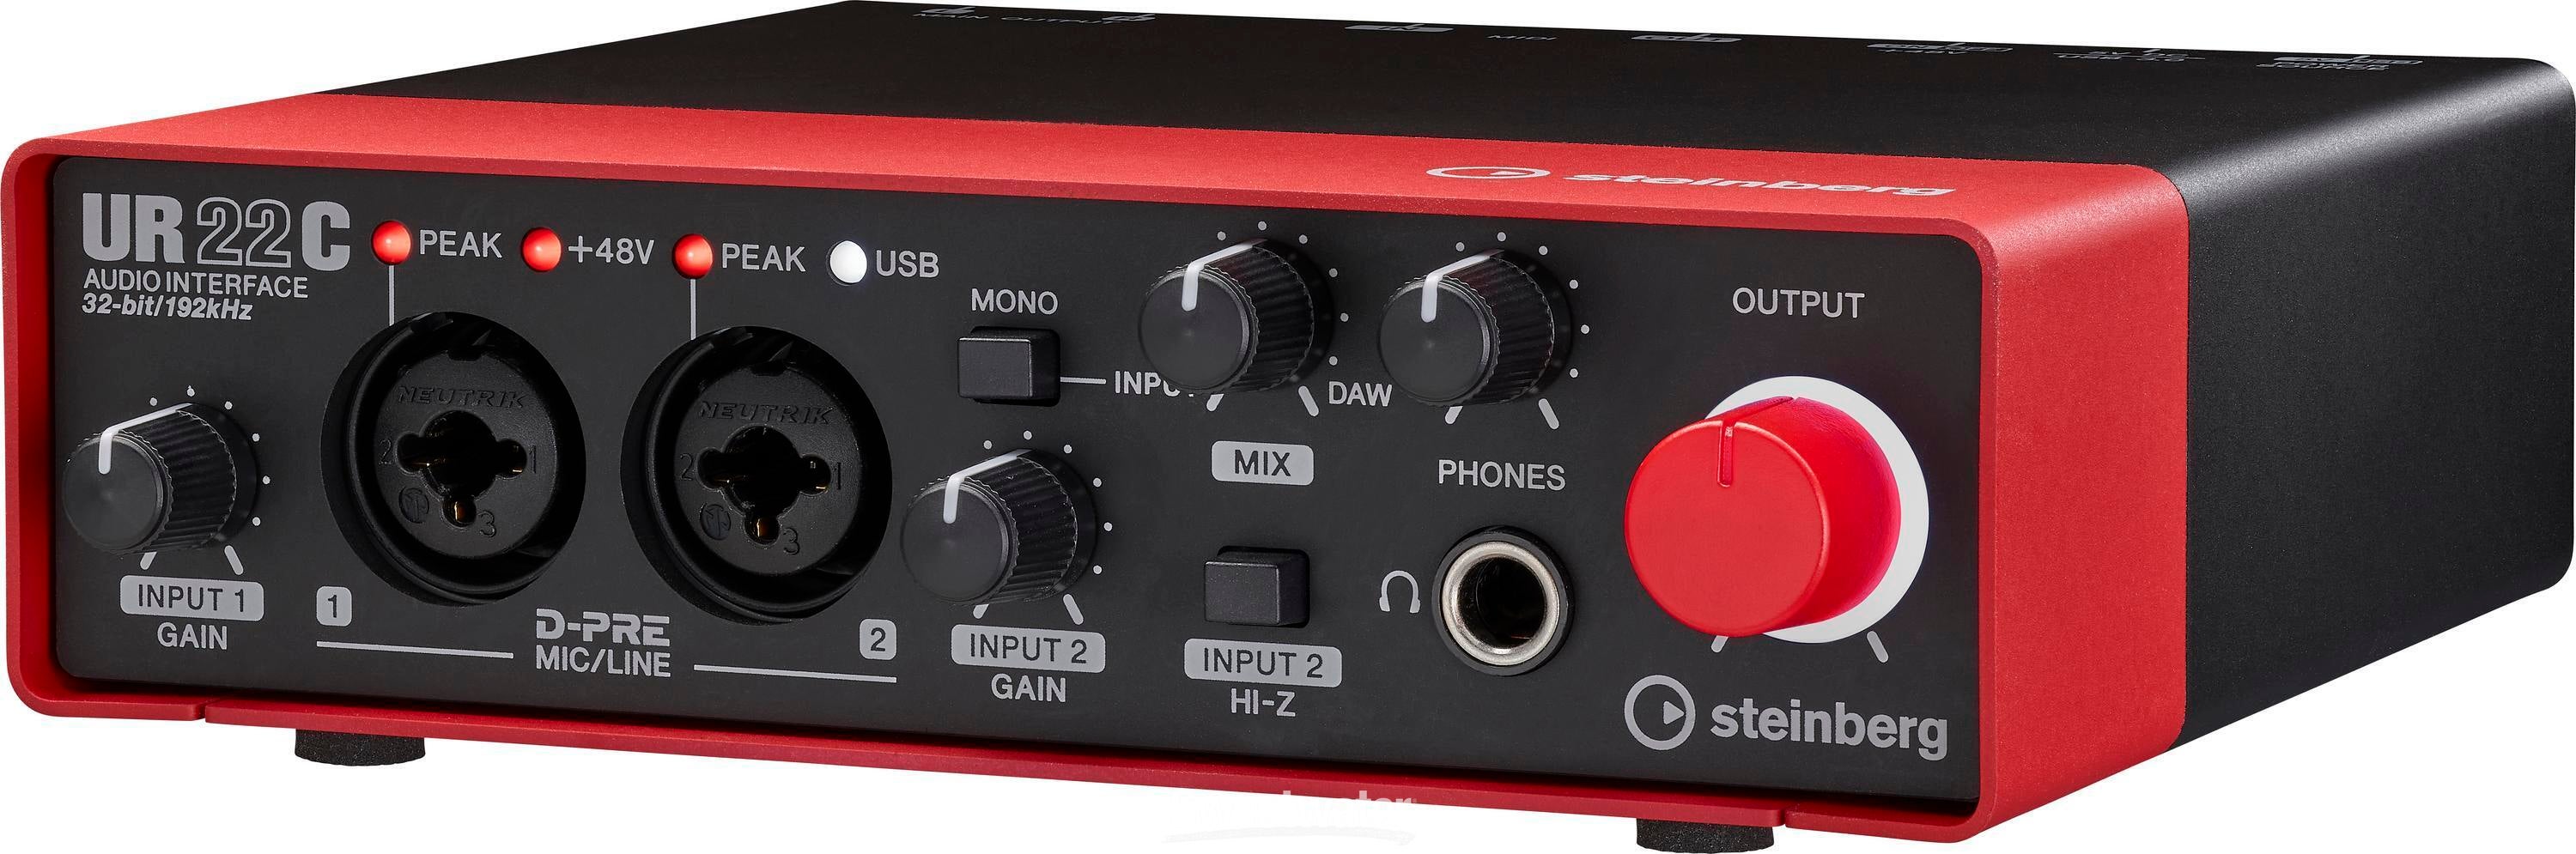 UR22C USB Audio Interface - Red - Sweetwater